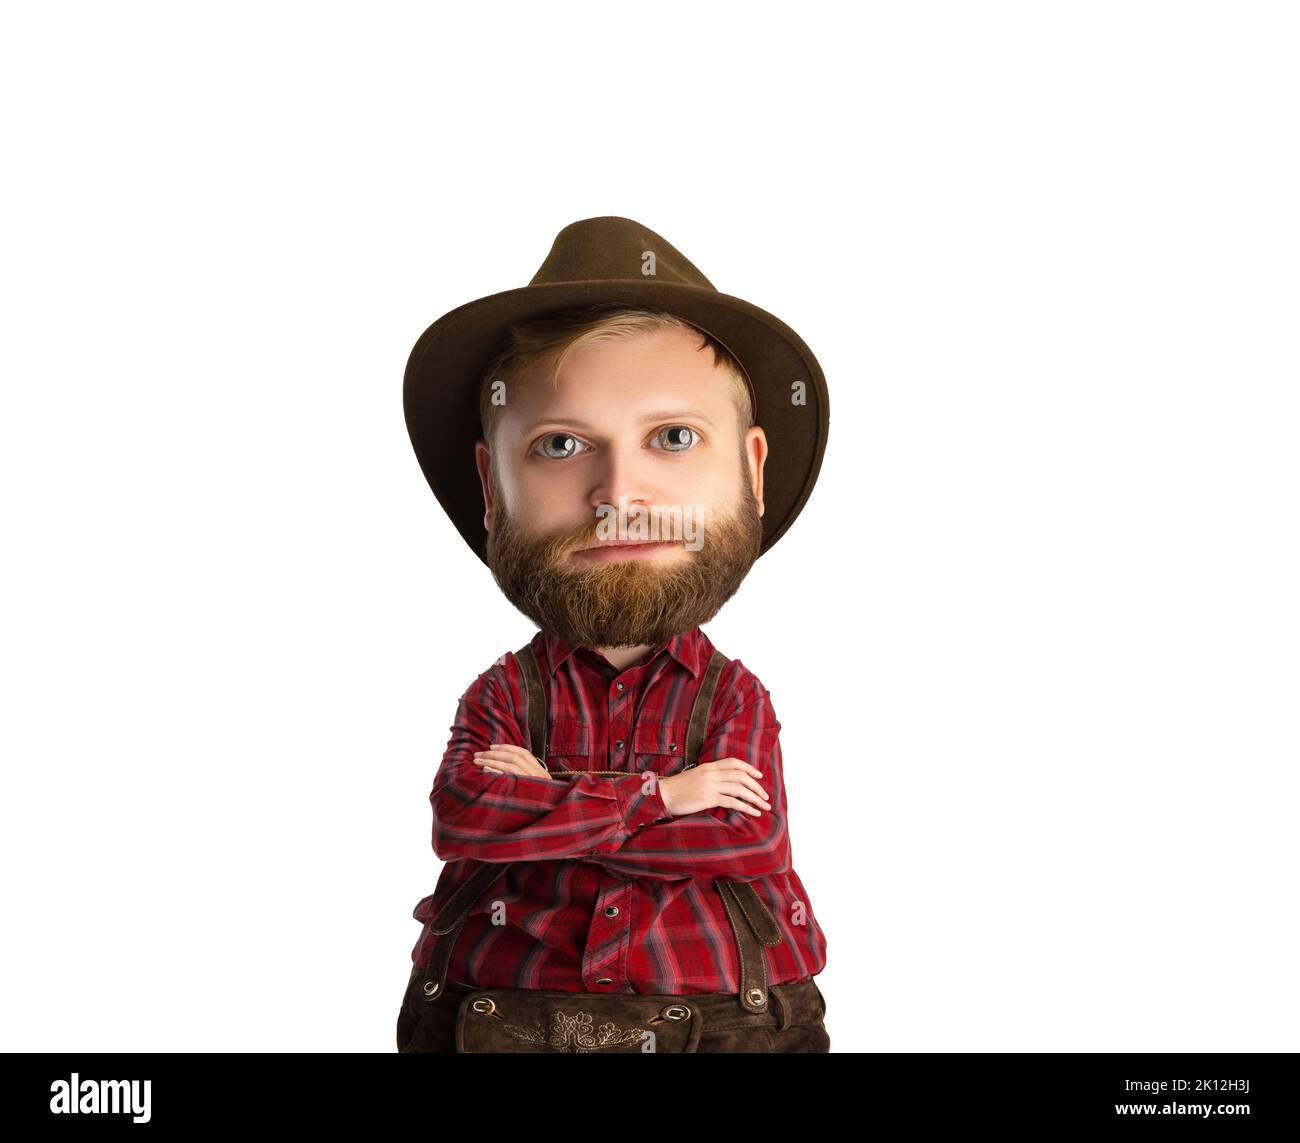 Funny cartoon portrait of young bearded man in hat, wearing traditional Bavarian clothes. Funny meme emotions. Holidays, festival, oktoberfest concept Stock Photo